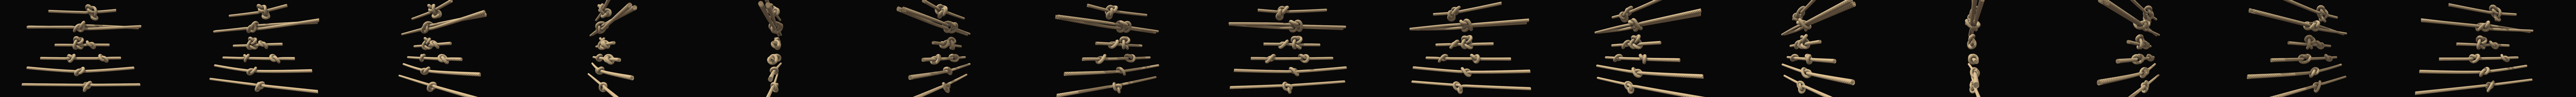 1,229 Plastic Rope For Packing Images, Stock Photos, 3D objects, & Vectors